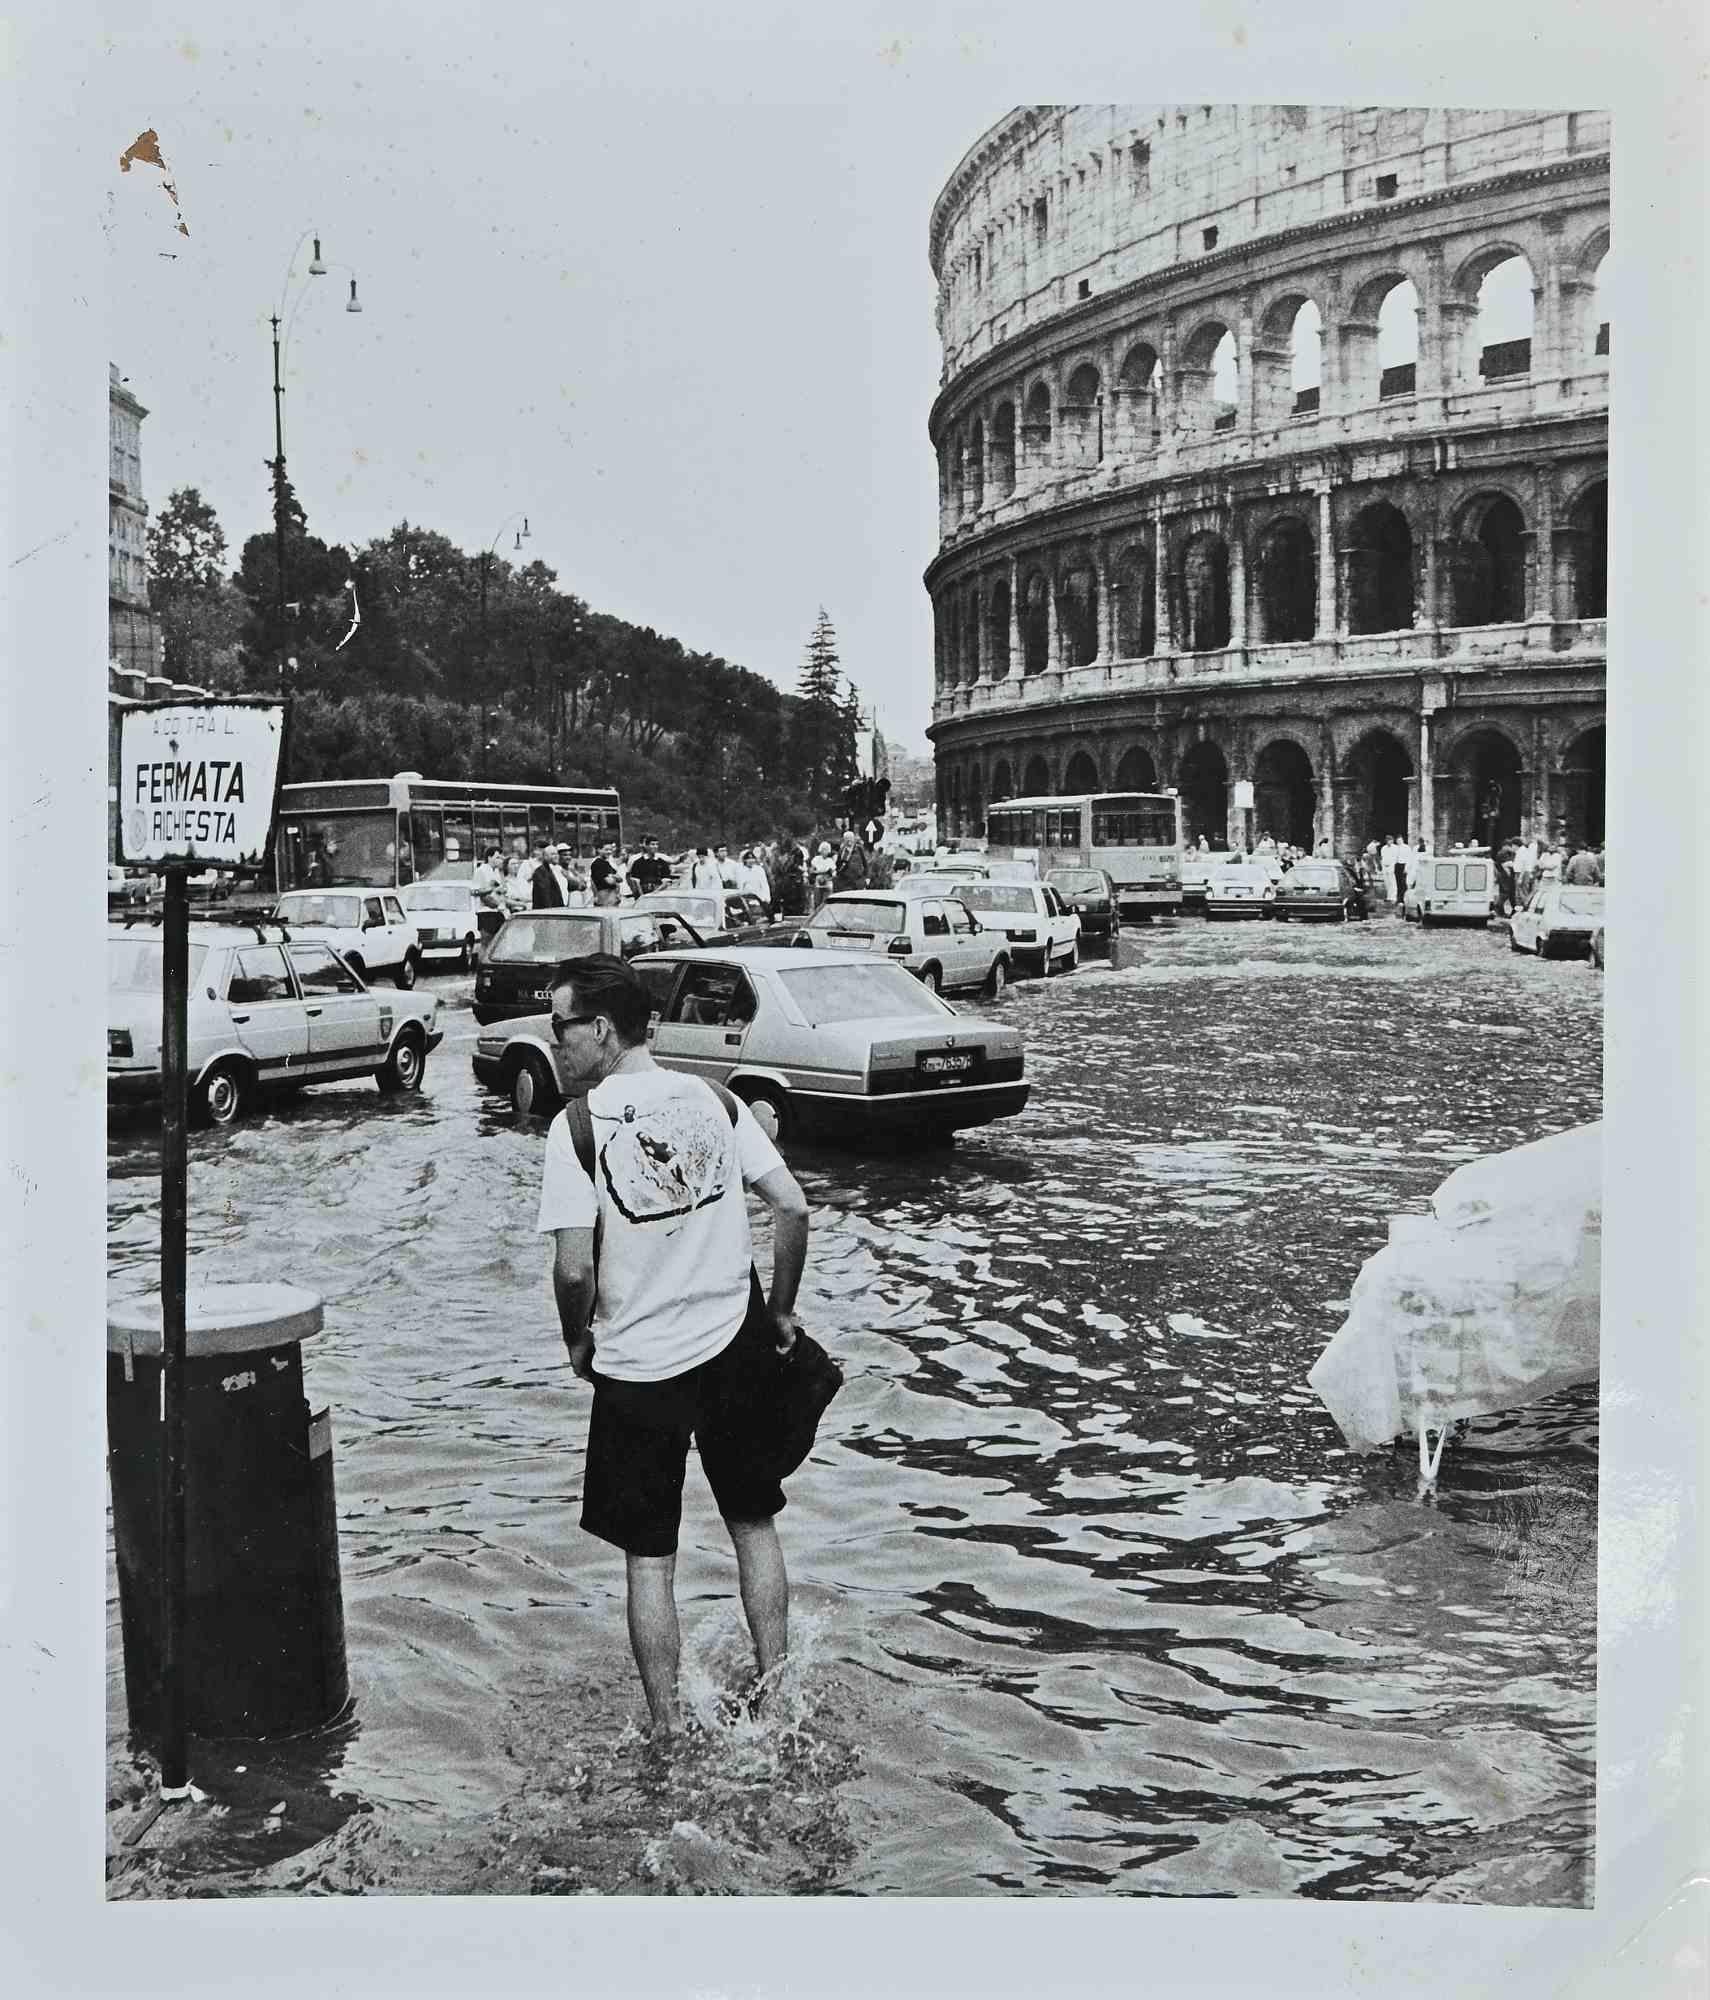 Downpour in Rome 1989 - Photograph - 1989